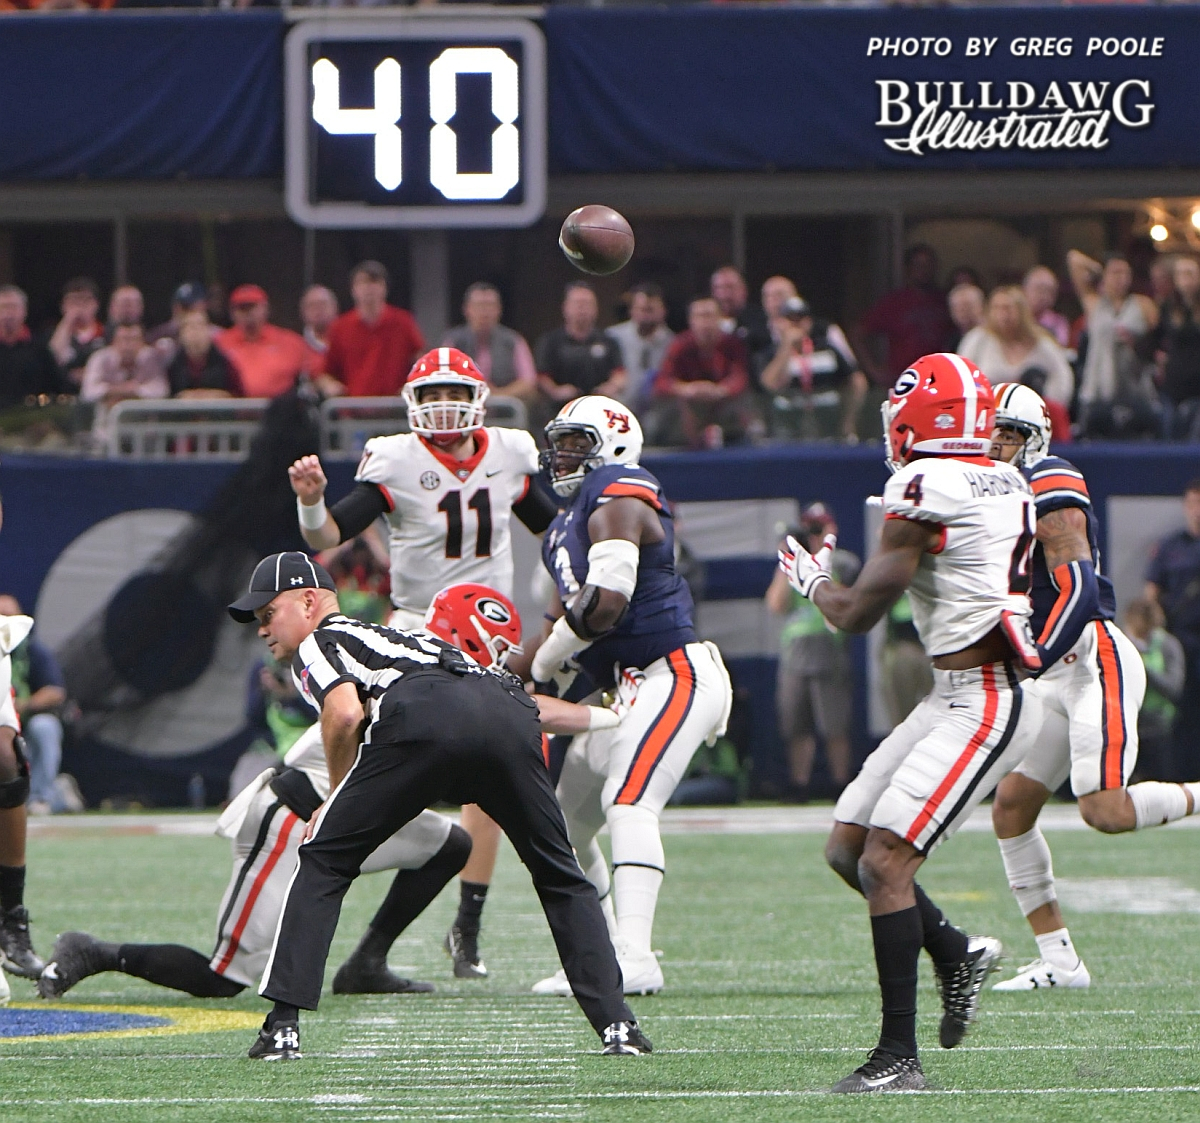 Jake Fromm (11) fires a strike to Mecole Hardman (4) - 2017 SEC Championship, Saturday, Dec. 2, 2017 -